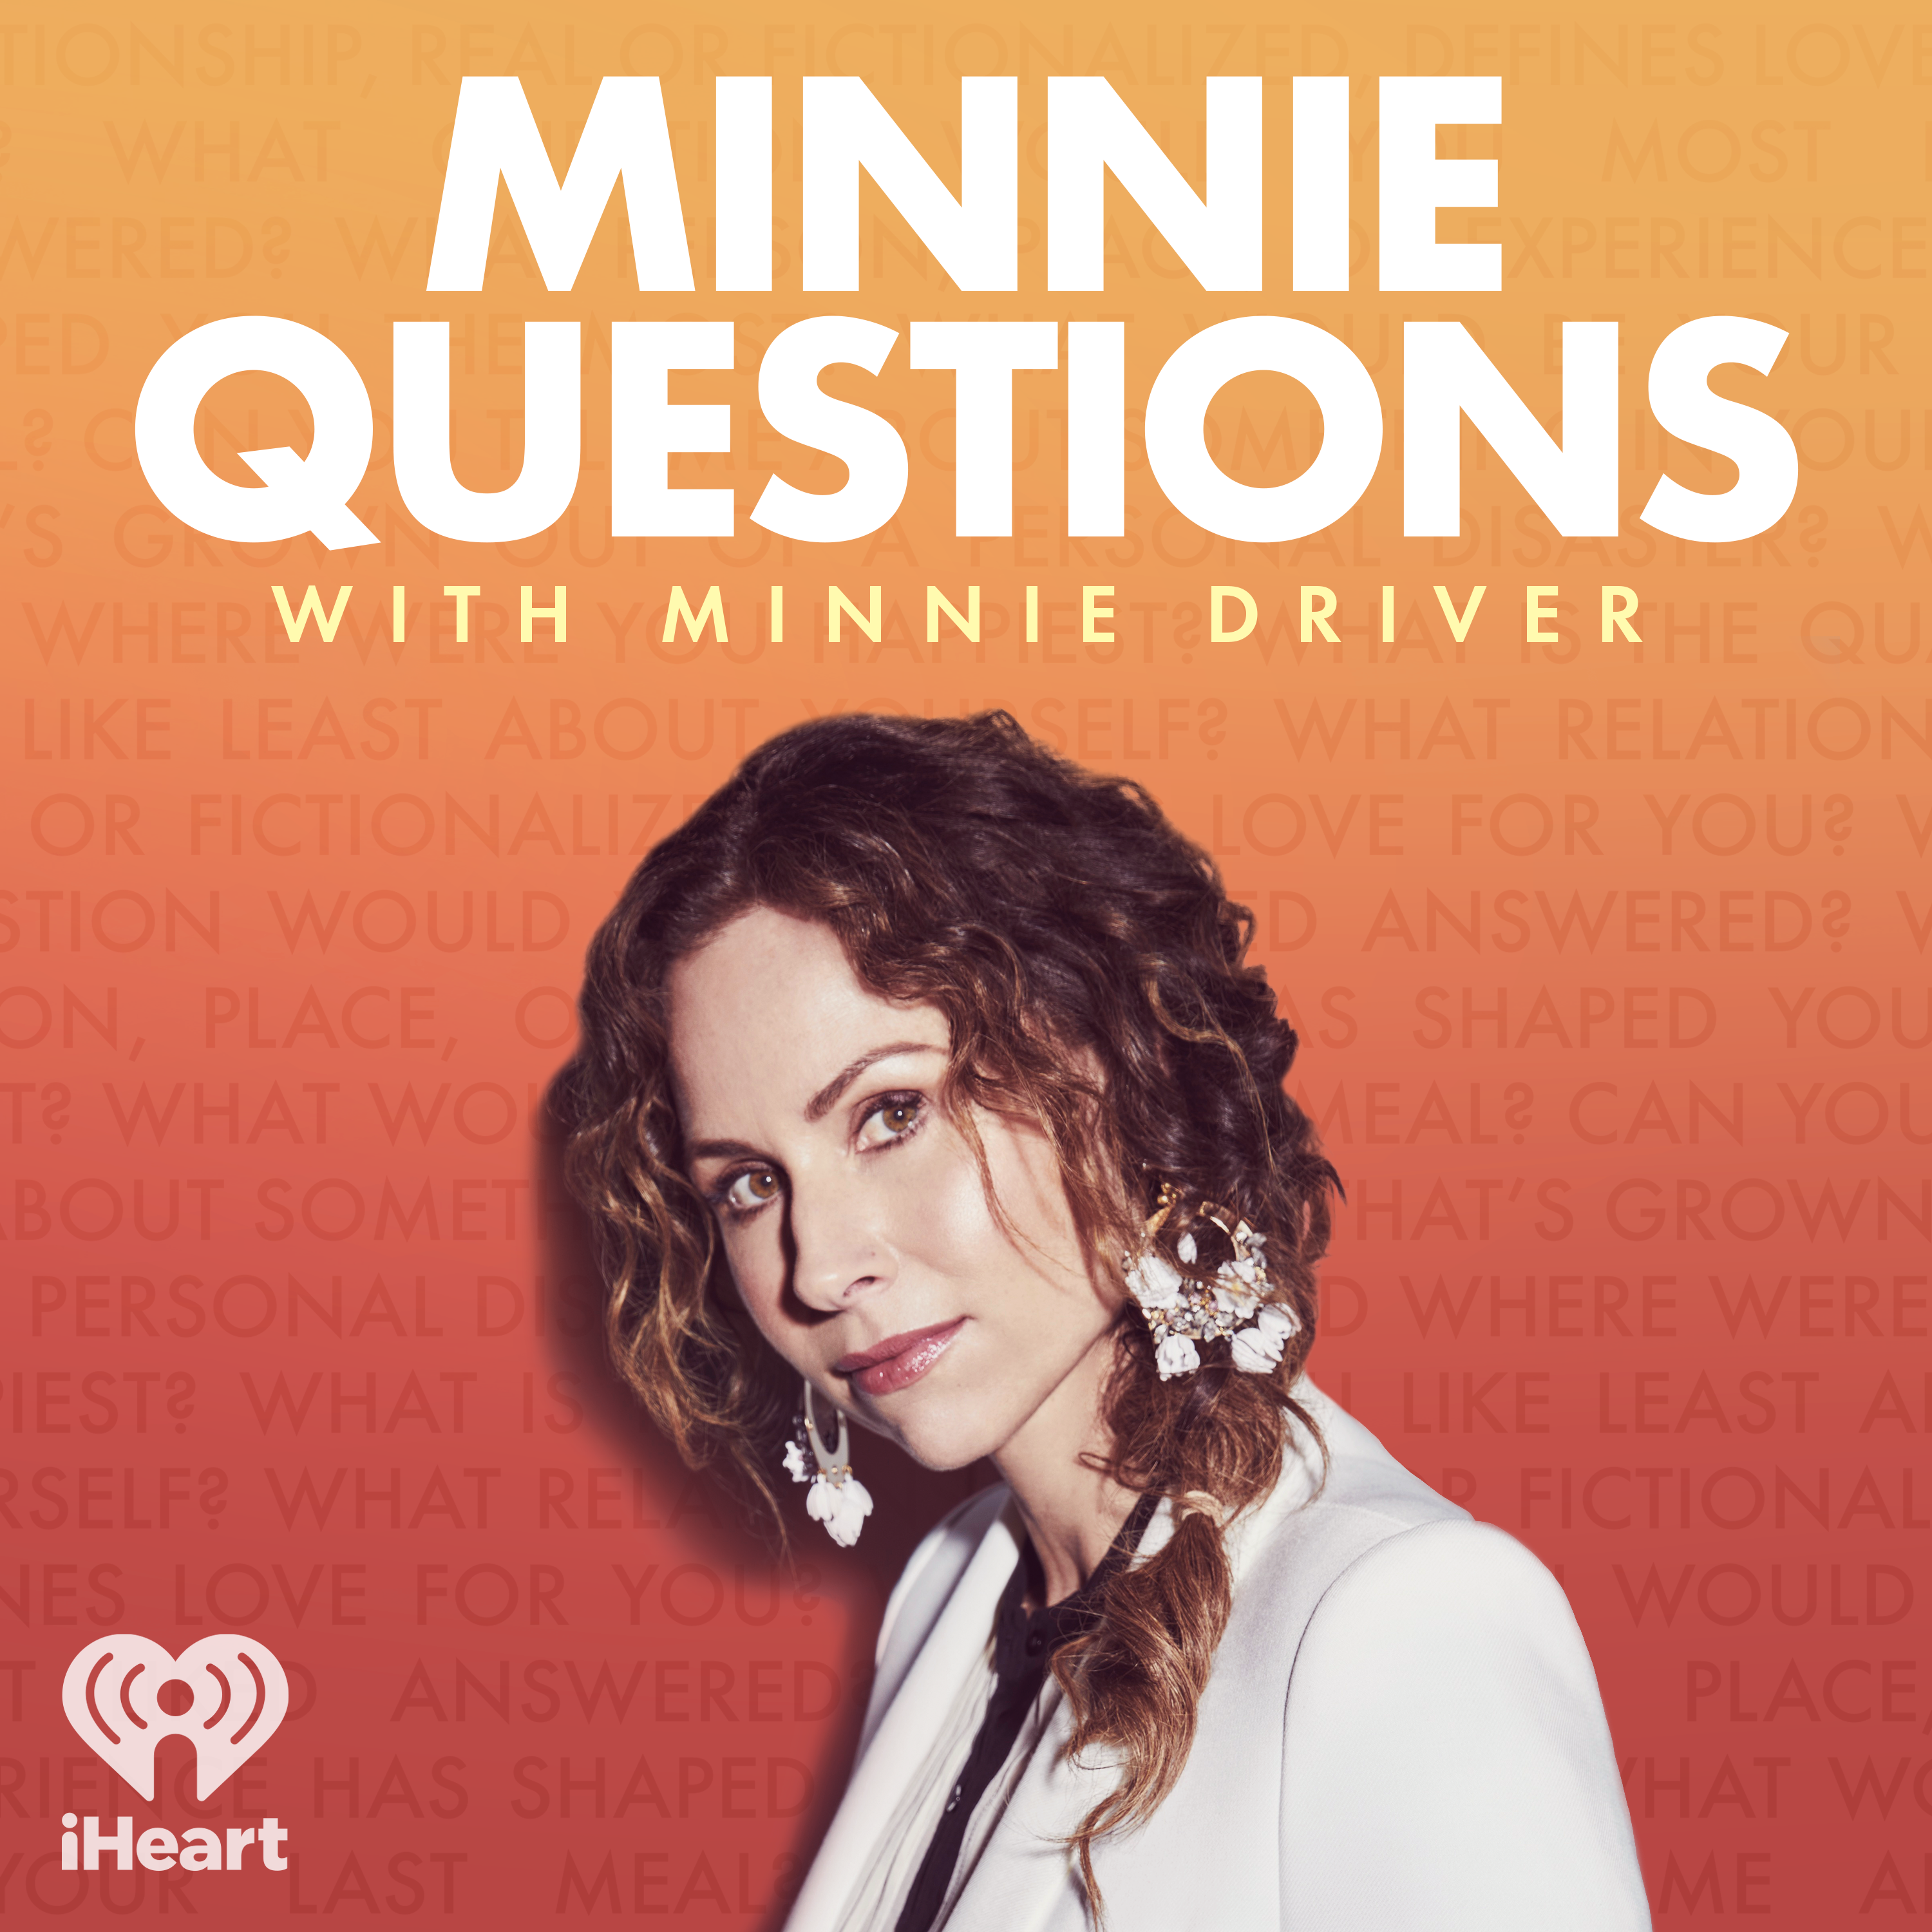 Introducing: Minnie Questions with Minnie Driver